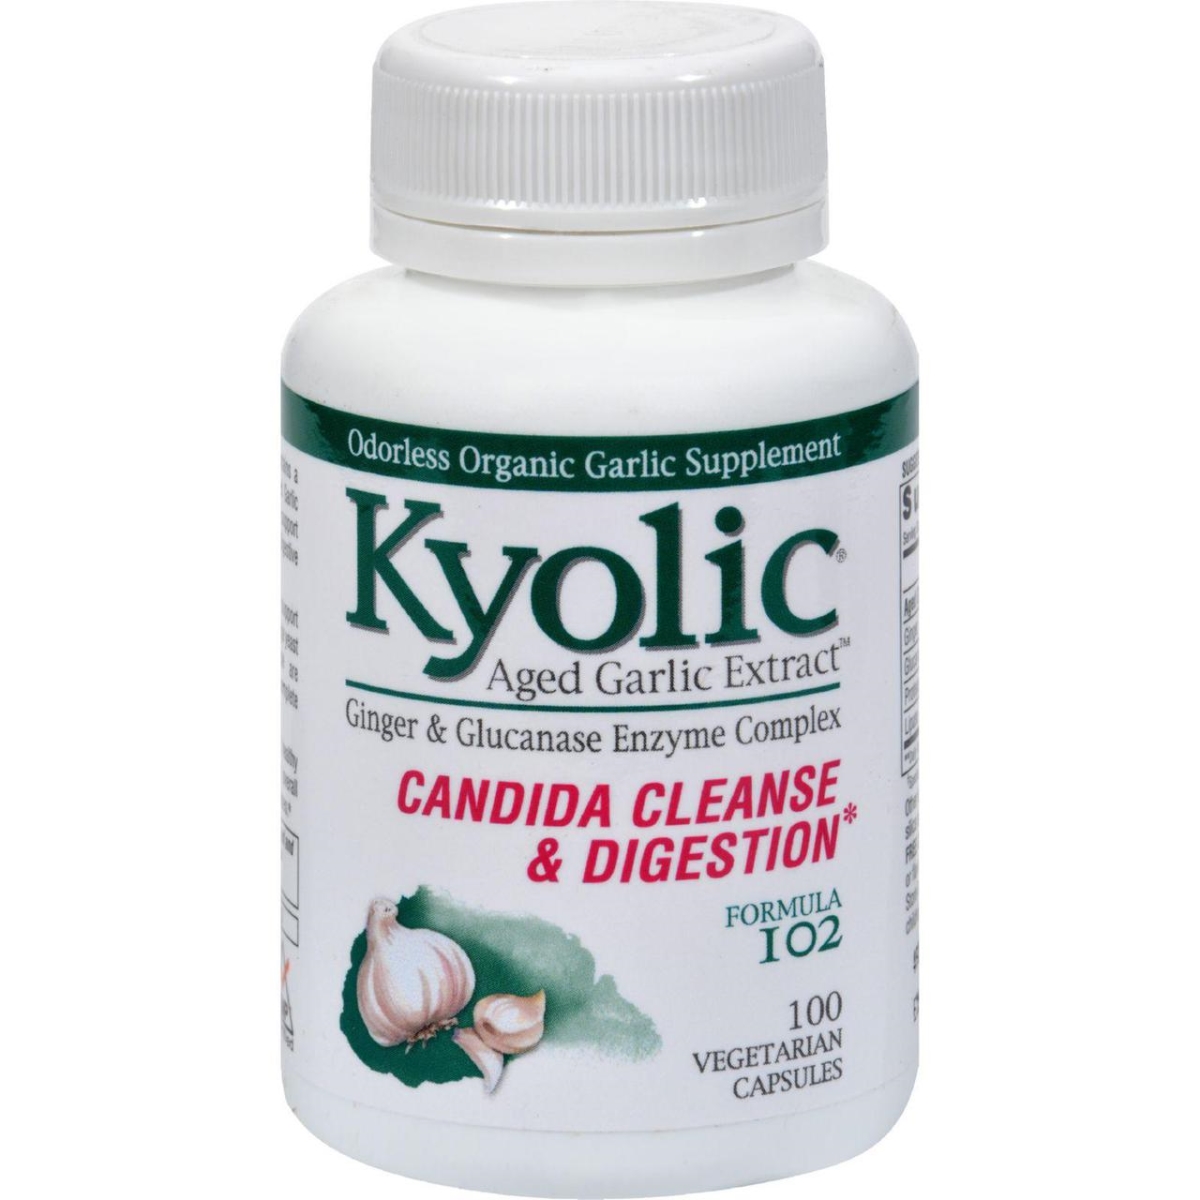 Hg0294702 Aged Garlic Extract Candida Cleanse & Digestion Formula 102, 100 Vegetarian Capsules